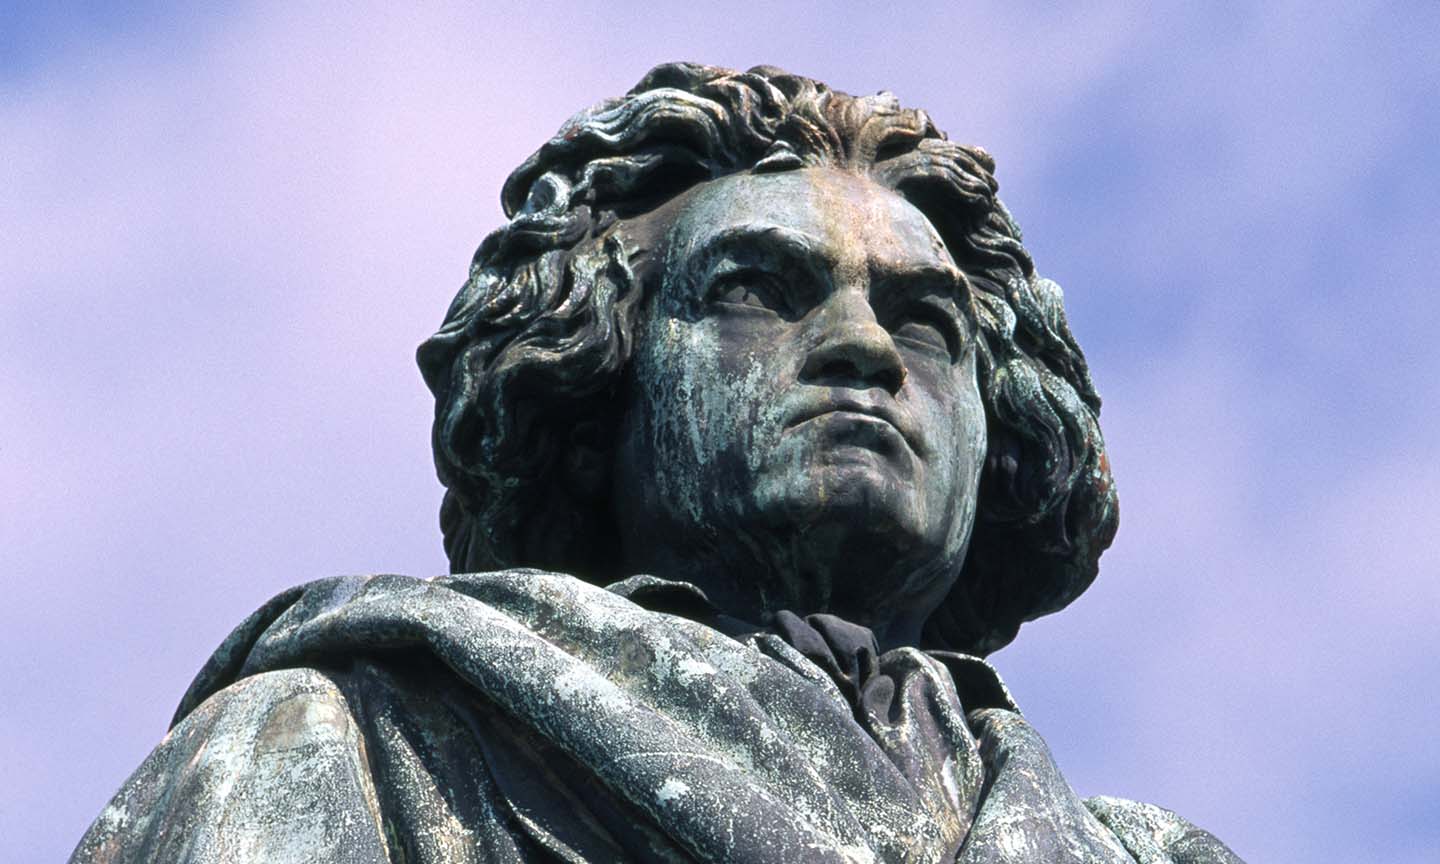 reDiscover Beethoven’s ‘Eroica’ Symphony No. 3